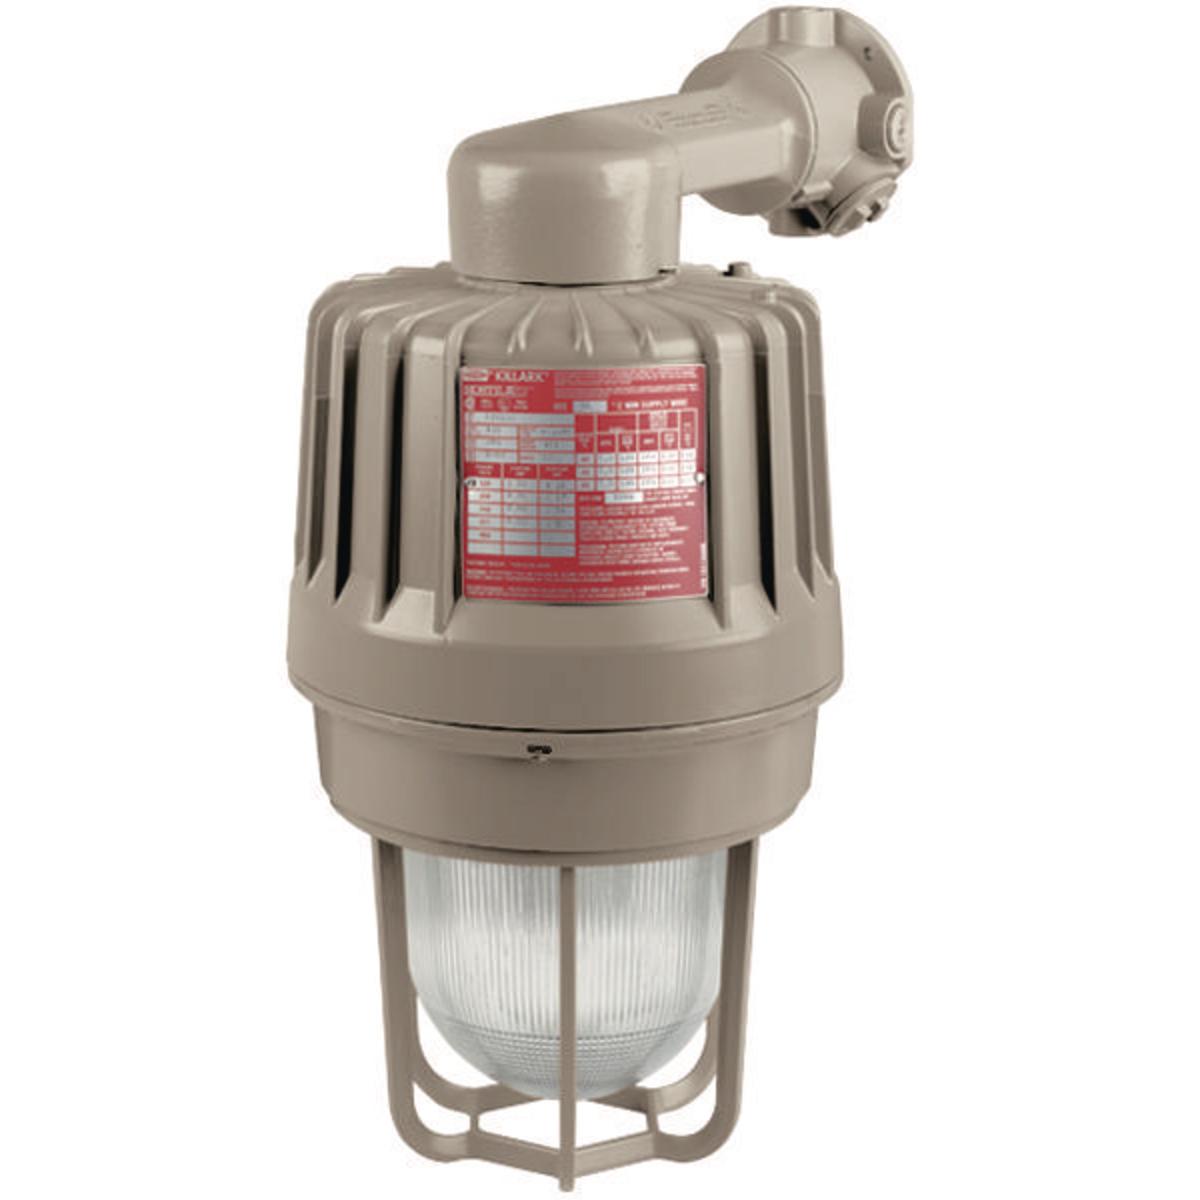 Hubbell EZS105B3G 100W 480V High Pressure Sodium 1" Wall Mount with Guard  ; Three light sources – High Pressure Sodium (50-400W), Metal Halide (70-400W) and Pulse Start Metal Halide (175-400W) ; Mounting choice –Pendant, ceiling, 25˚ stanchion or 90˚ wall mount, all with 